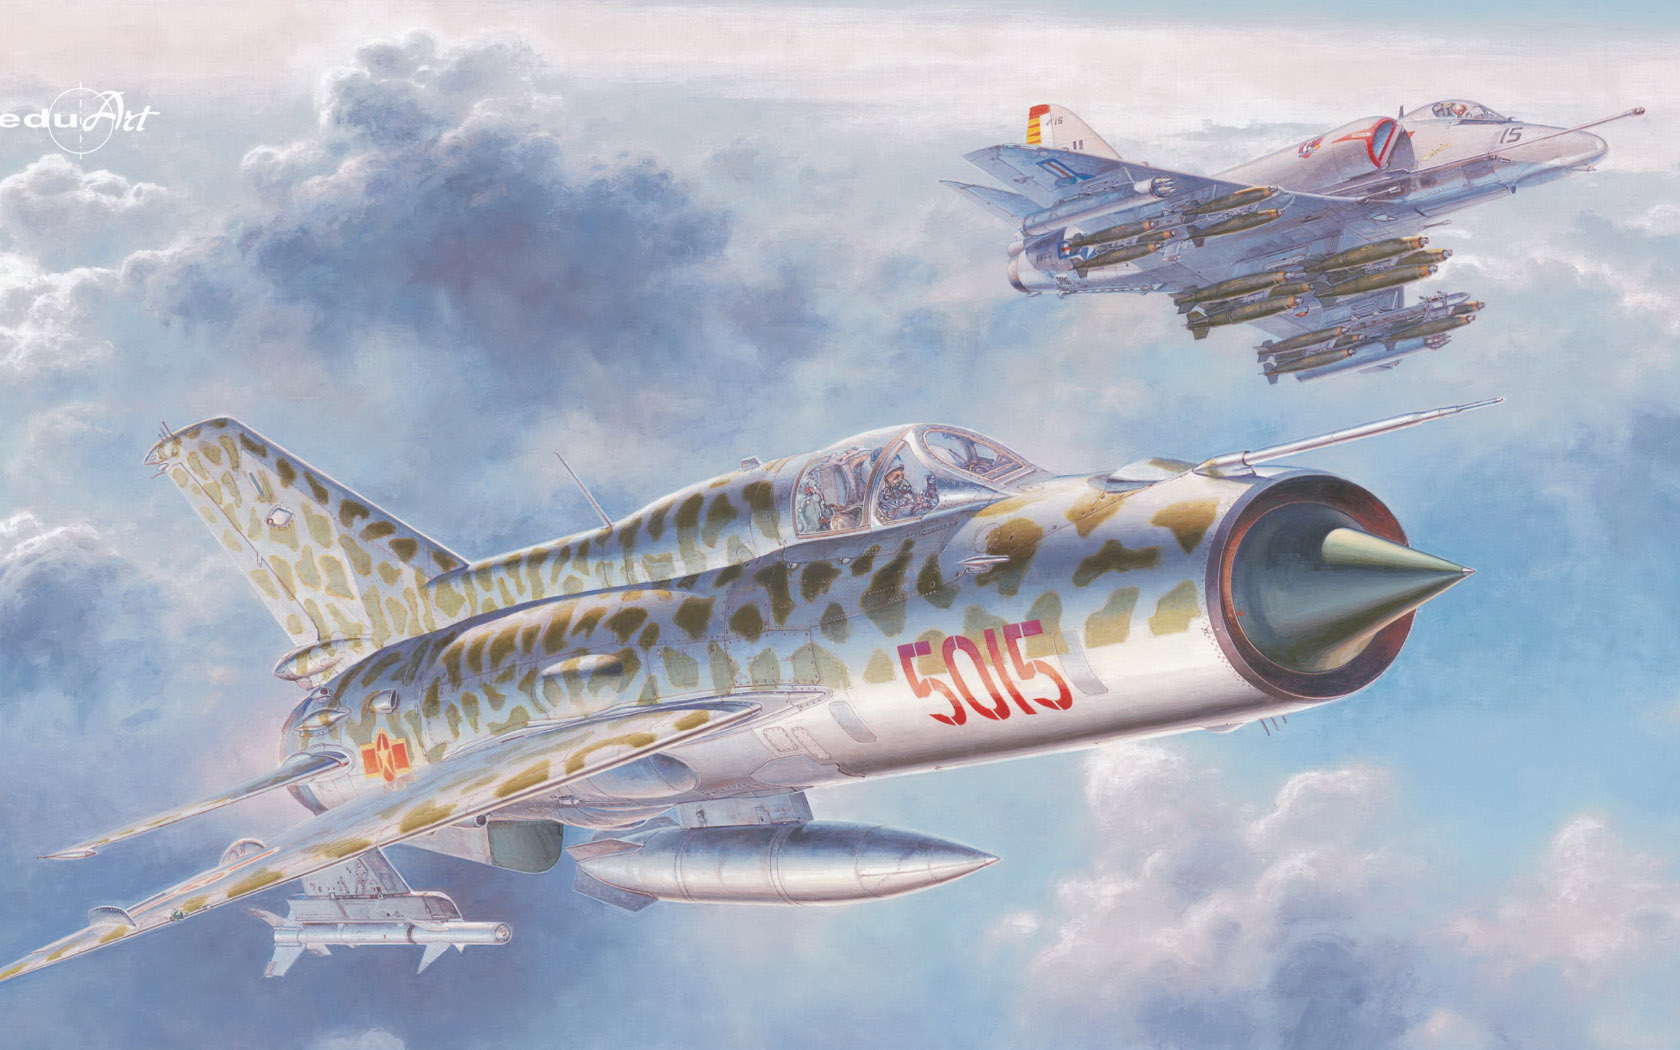 General 1680x1050 aircraft military military vehicle flying clouds sky artwork Mikoyan-Gurevich MiG-21 Douglas A-4 Skyhawk Vietnam War military aircraft watermarked Boxart Shigeo Koike VPAF United States Marine Corps jet fighter Attacker